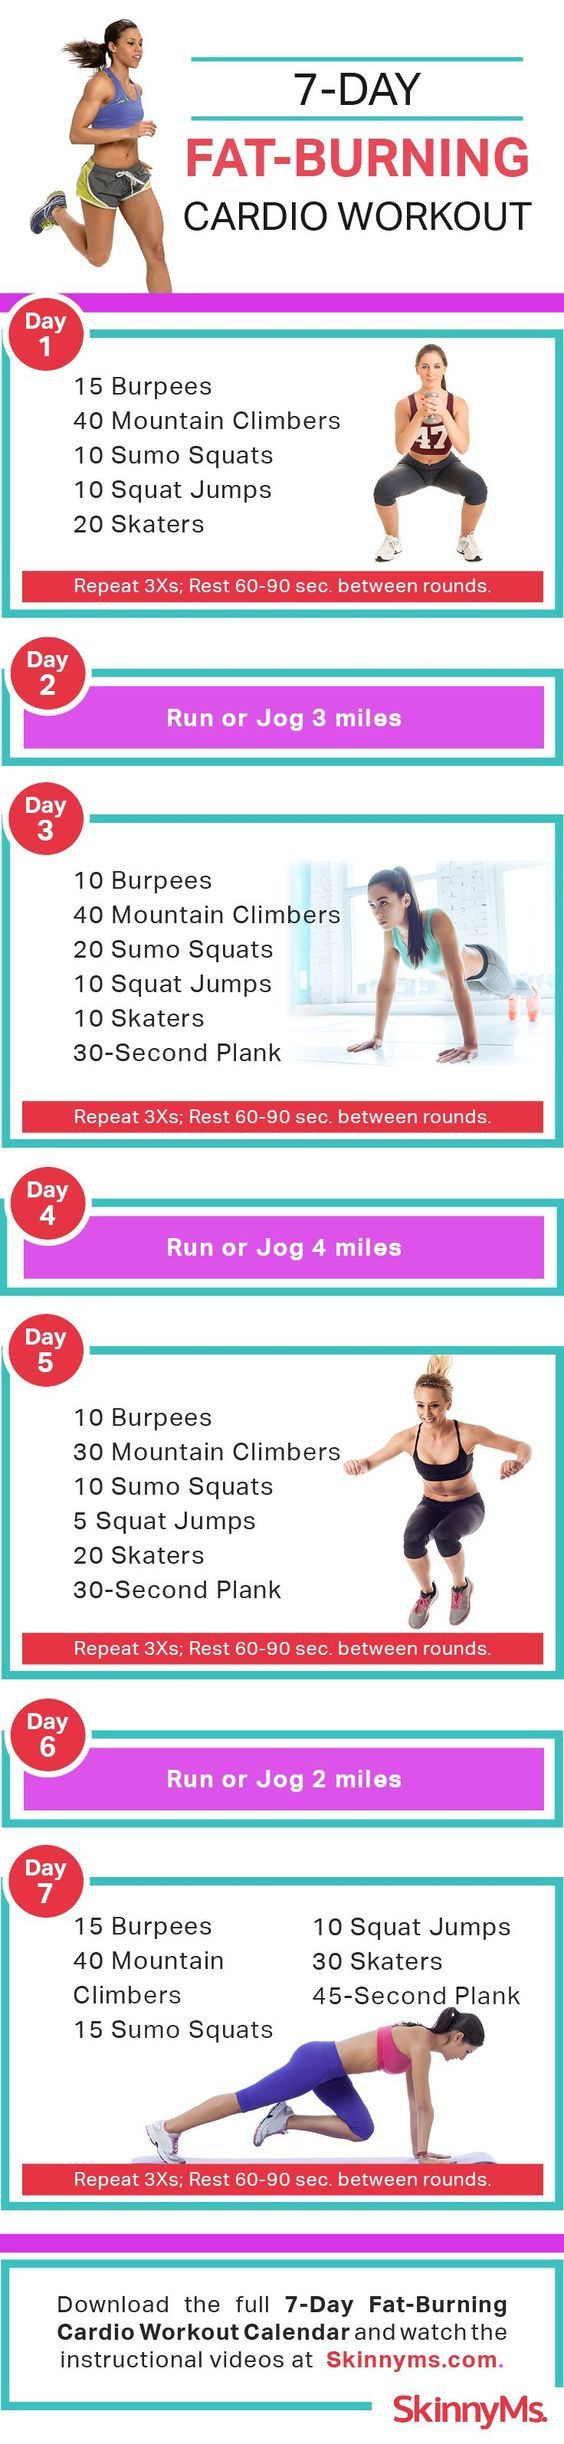 Fat Burning Workout
 7035 best images about Workouts on Pinterest